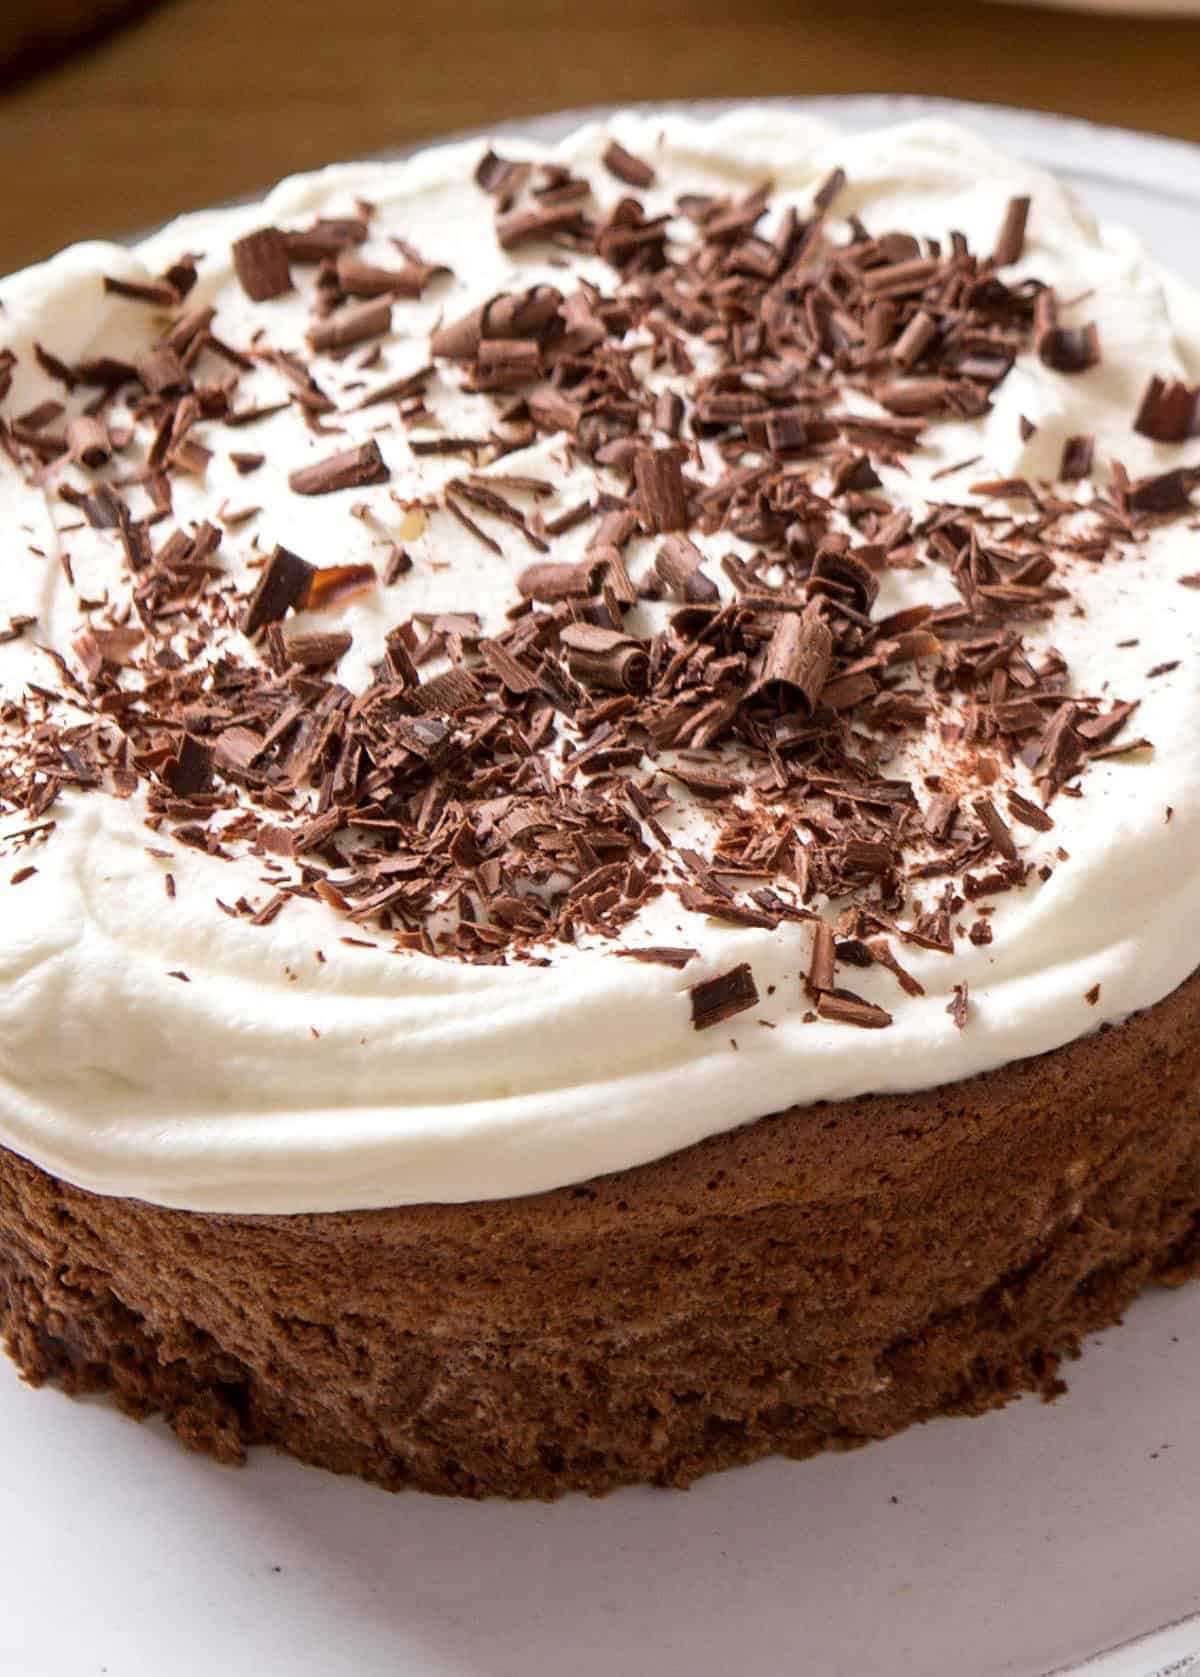  Satisfy your sweet tooth with a twist of chestnuts in our Chocolate Chestnut Cake.